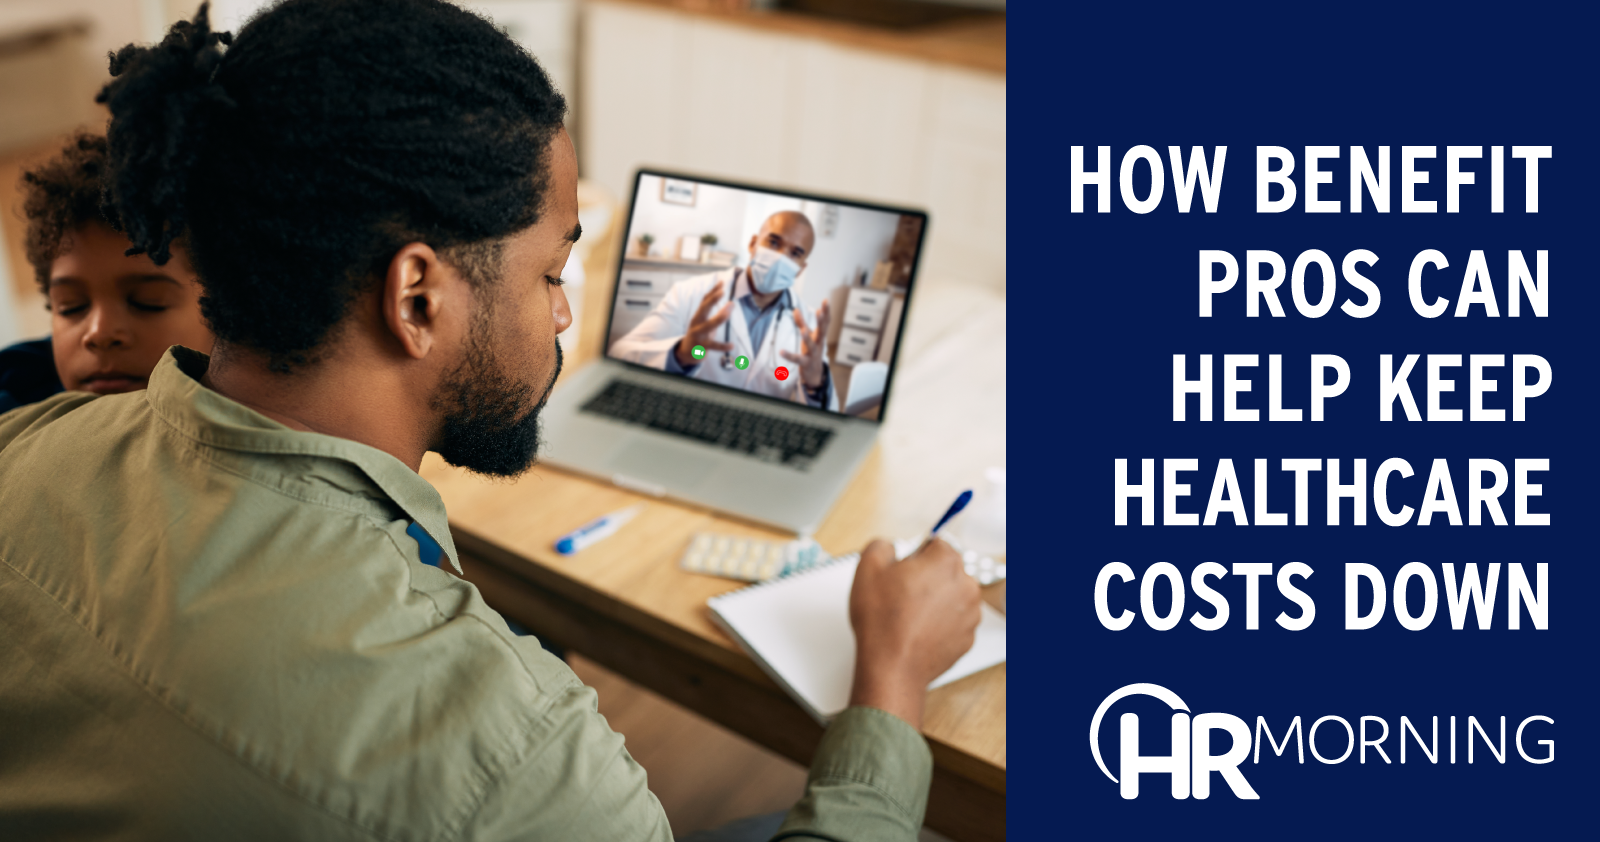 how benefit pros can help keep healthcare costs down